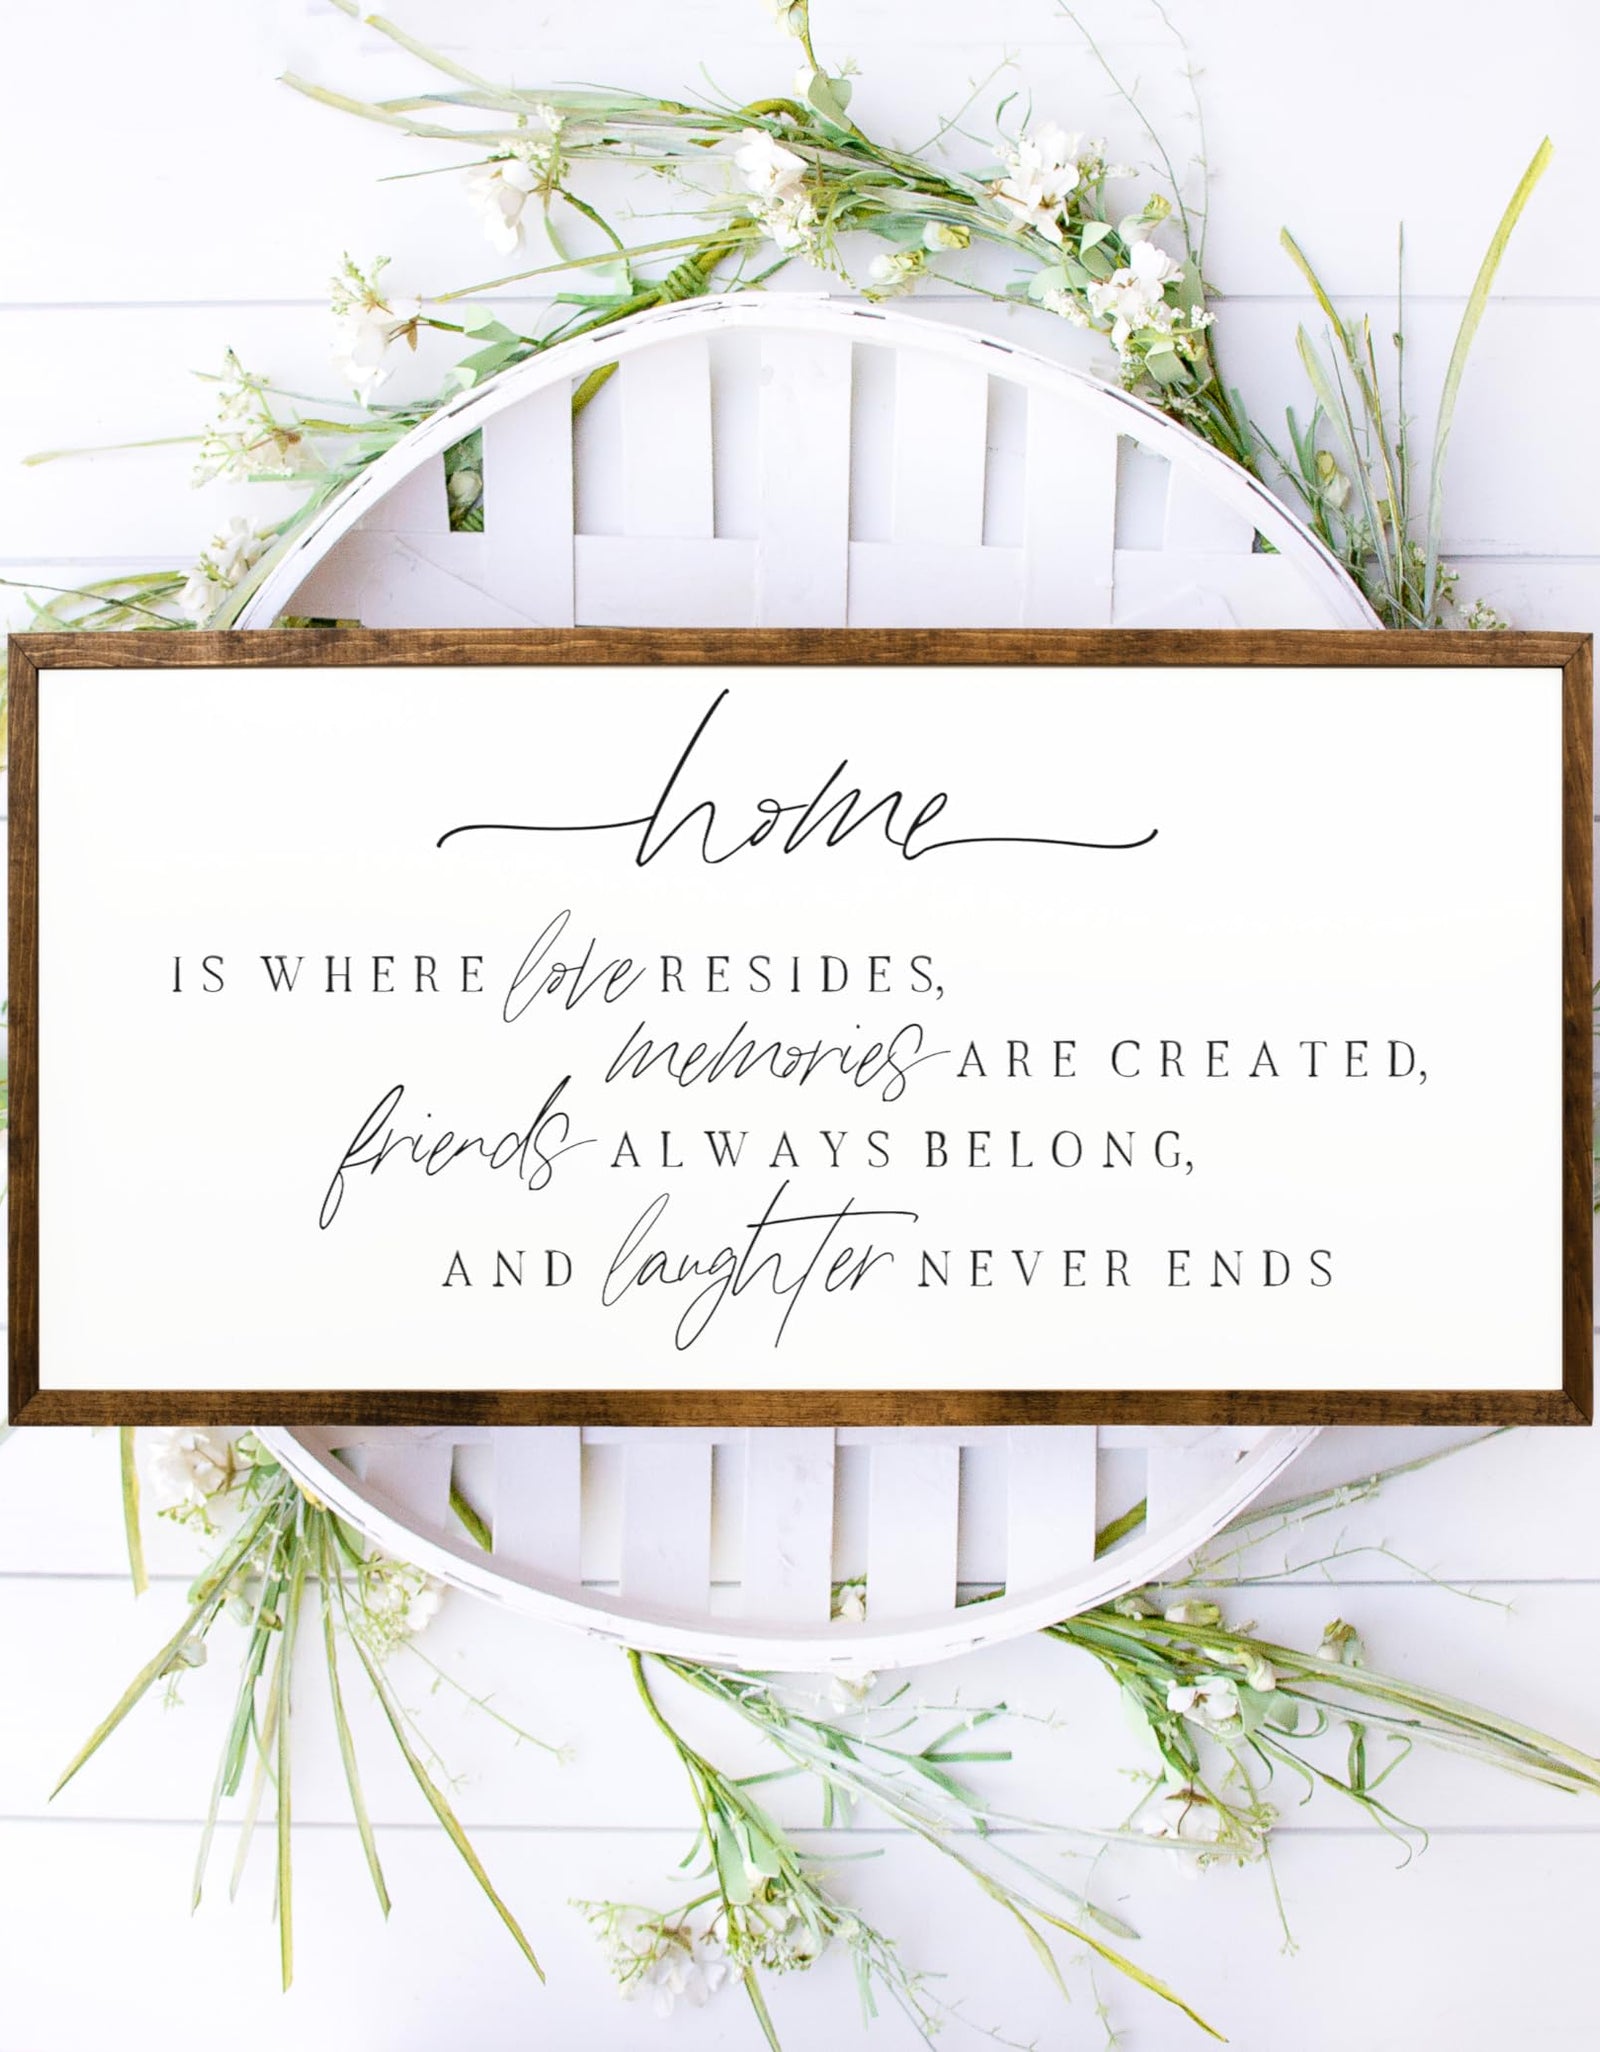 12x24 inches, Home Is Where Love Resides Wooden Sign | Rustic Handmade Wall Art | Inspirational Quote Decor | Farmhouse Style | Family Memories | Unique Gift Idea | Distressed Wood